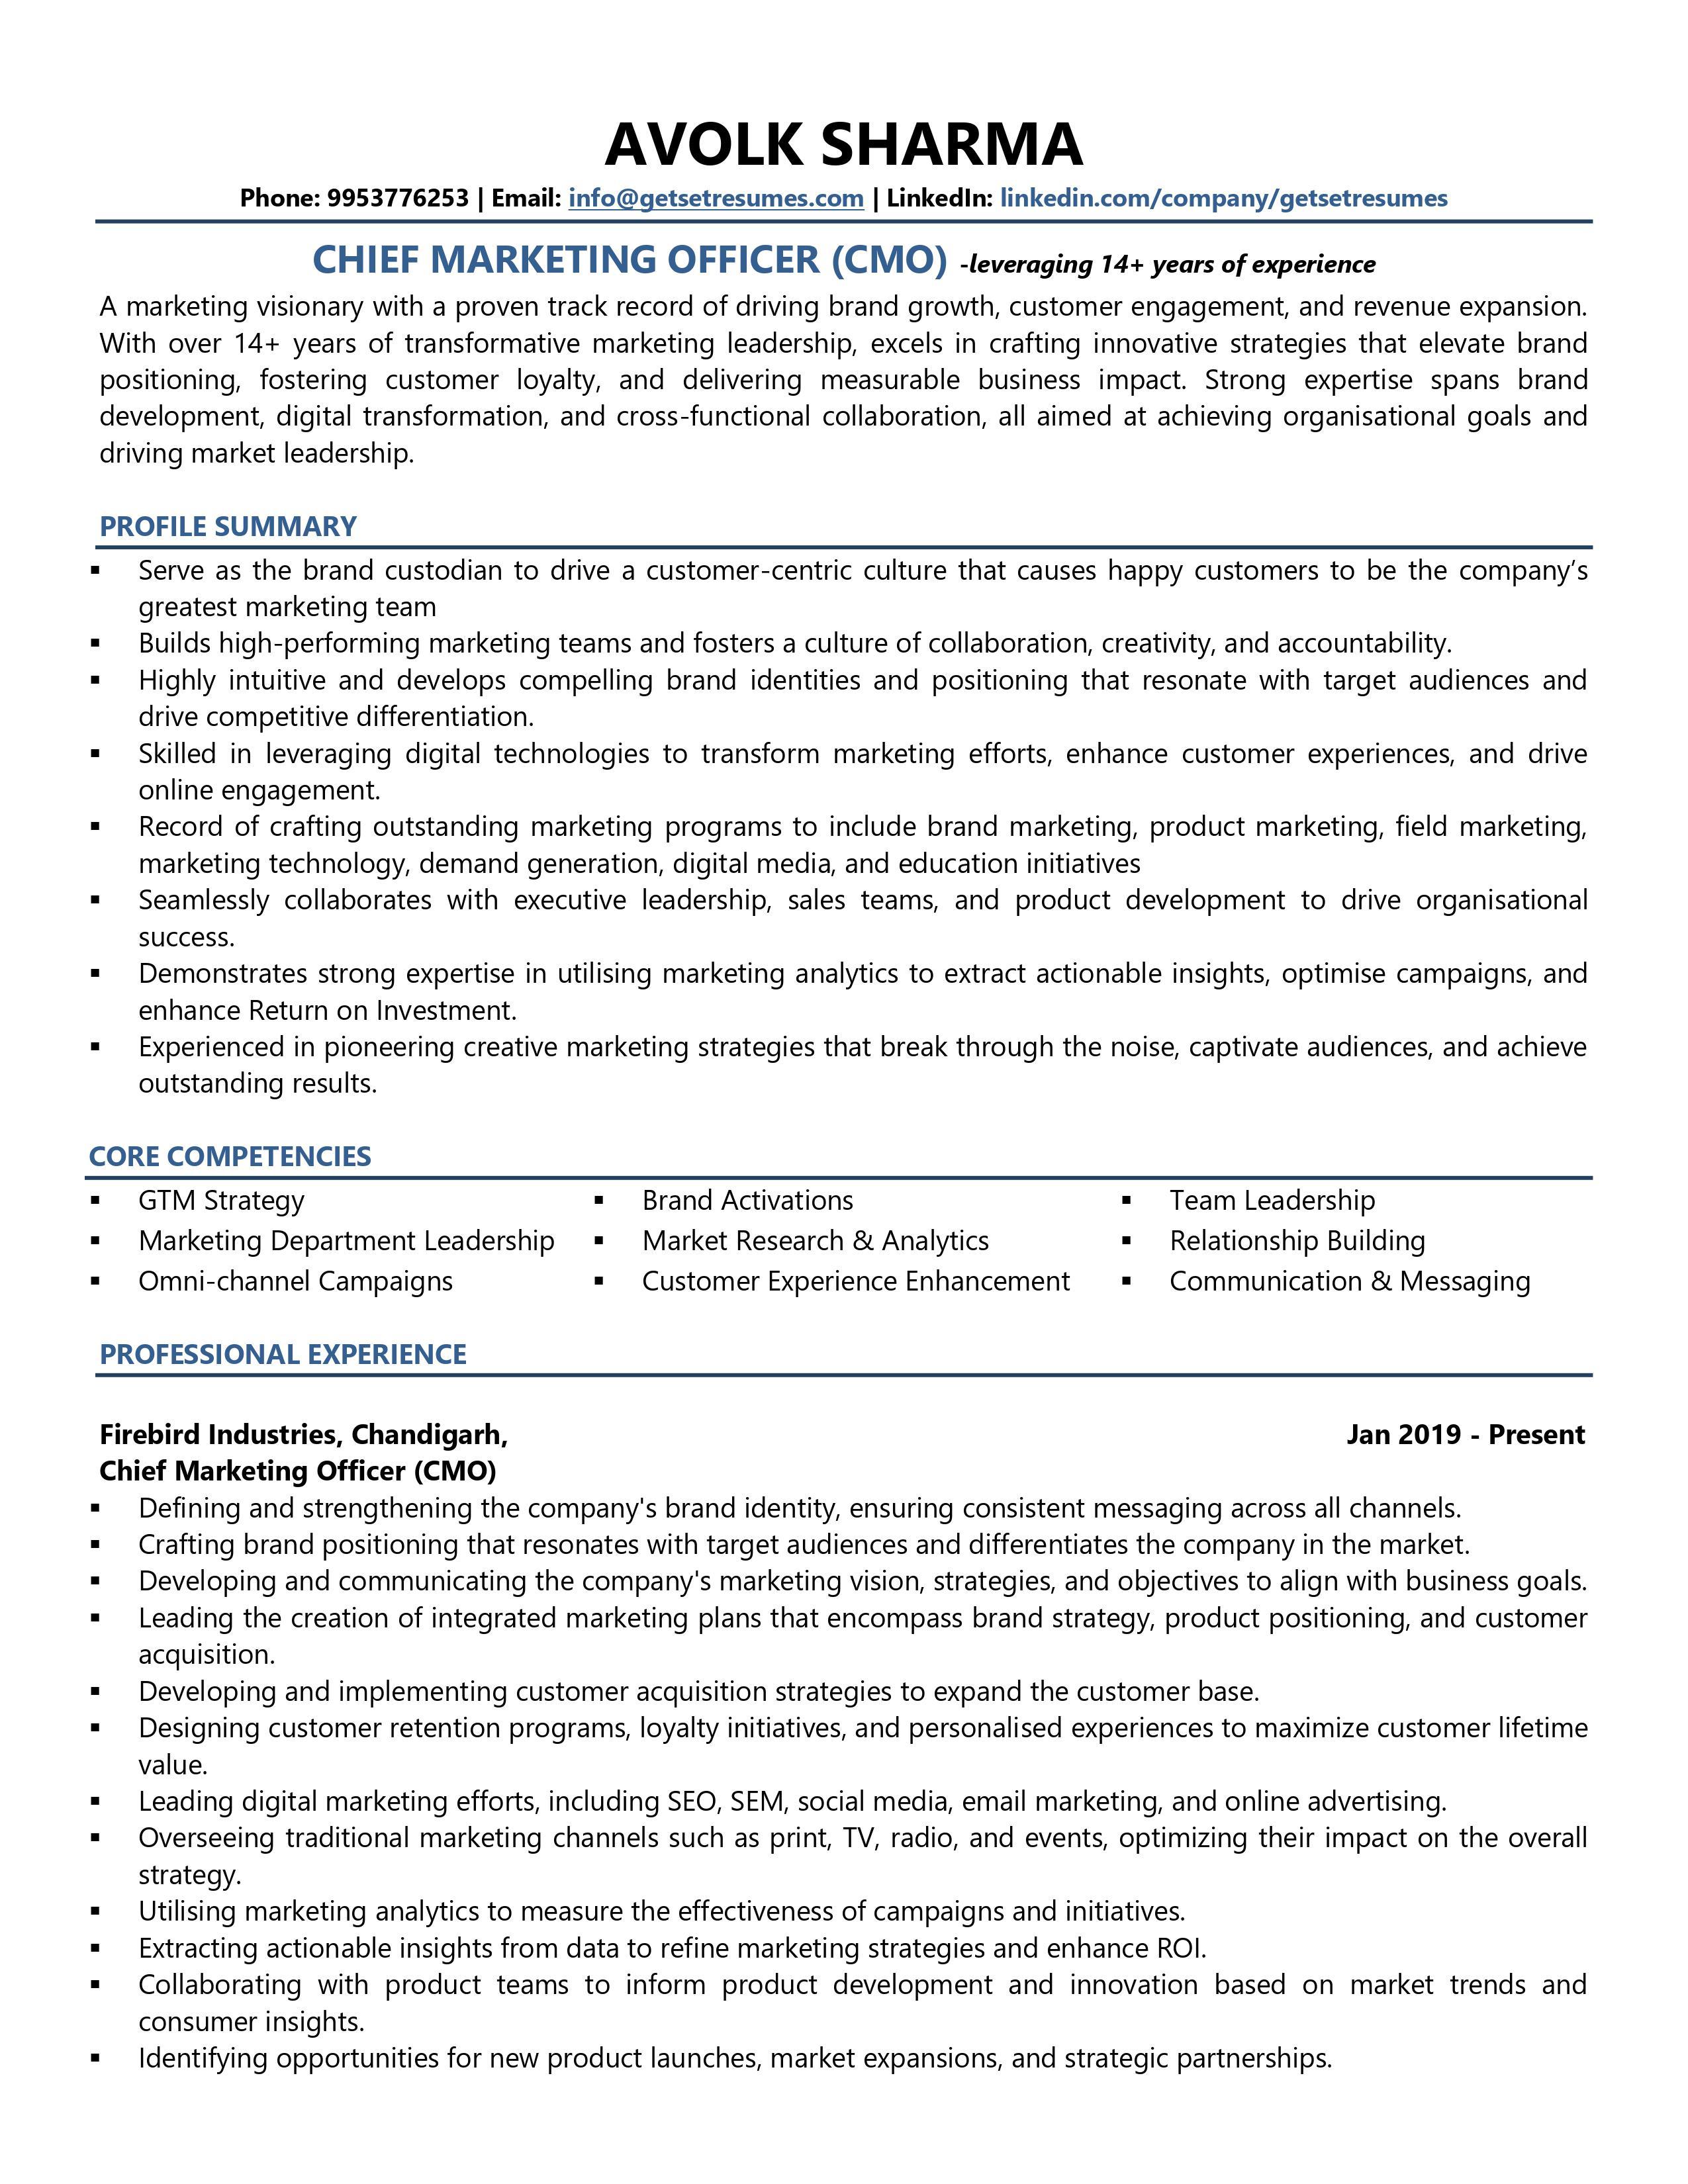 Chief Marketing Officer (CMO) - Resume Example & Template